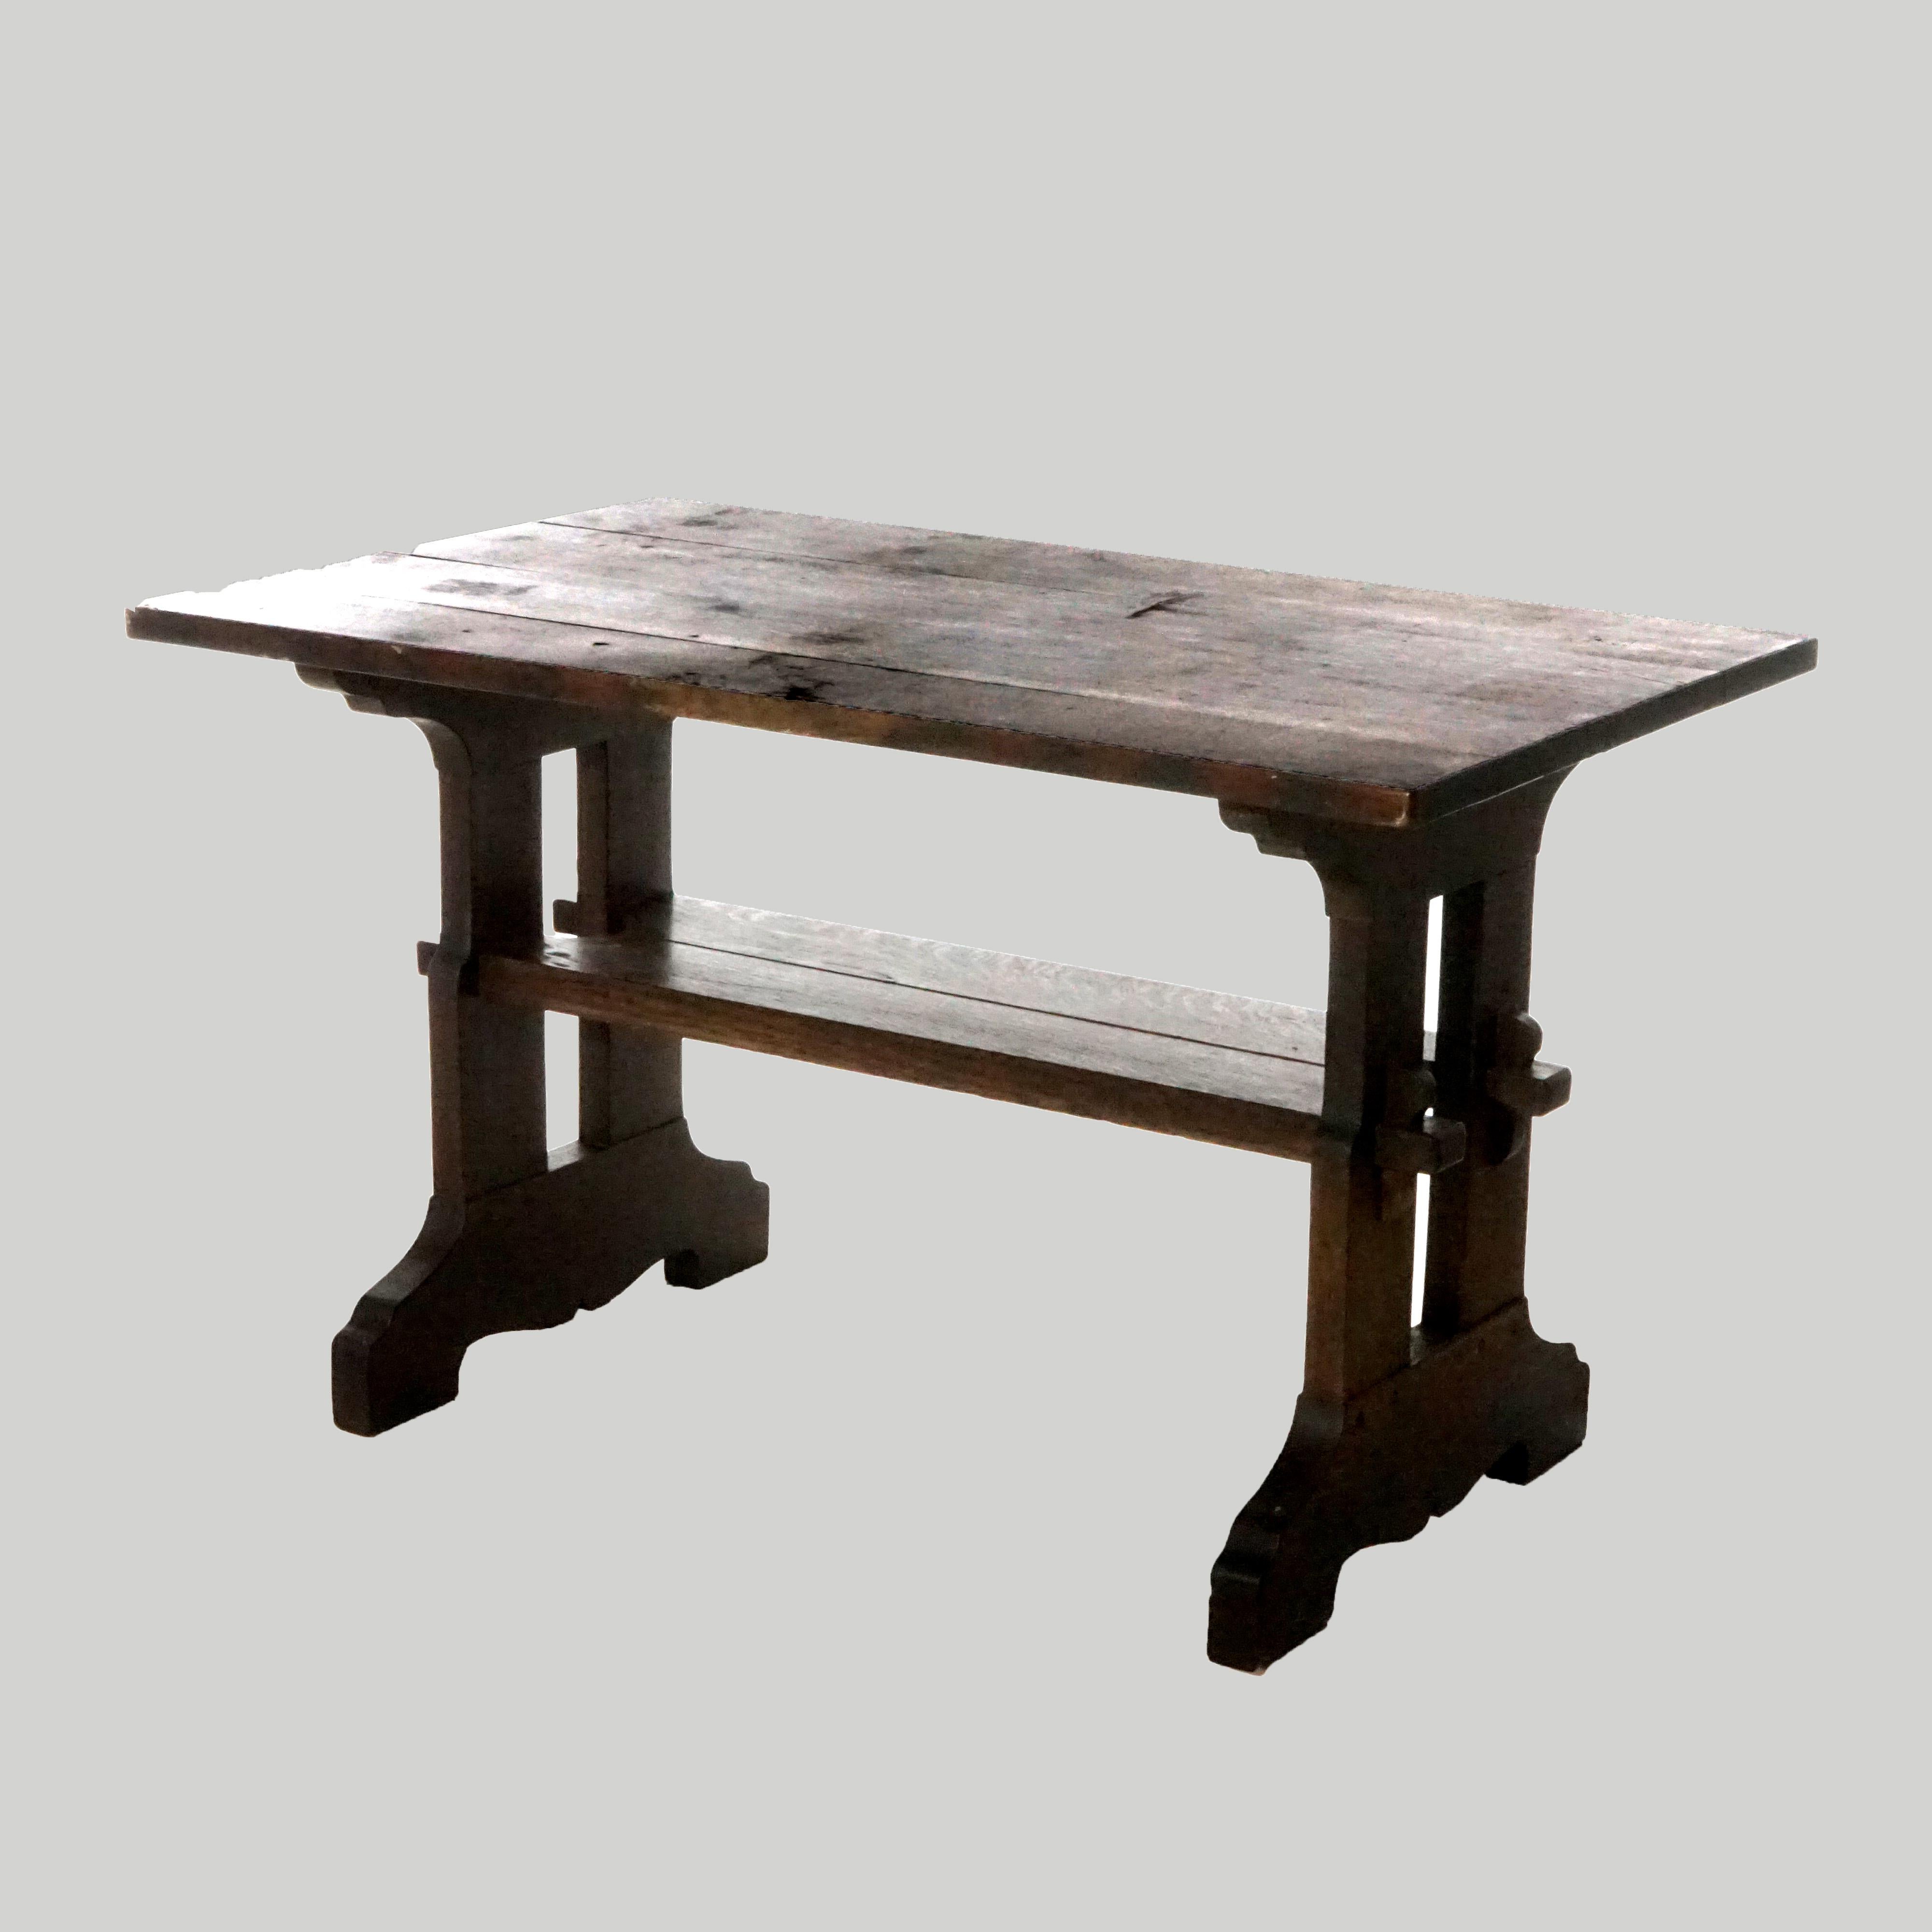 An antique Arts and Crafts Gustav Stickley Mission table offers oak construction with top raised on cut out mortise and tenon base with lower shelf, c1910

Measures- 29'' H x 48.25'' W x 29.75'' D.